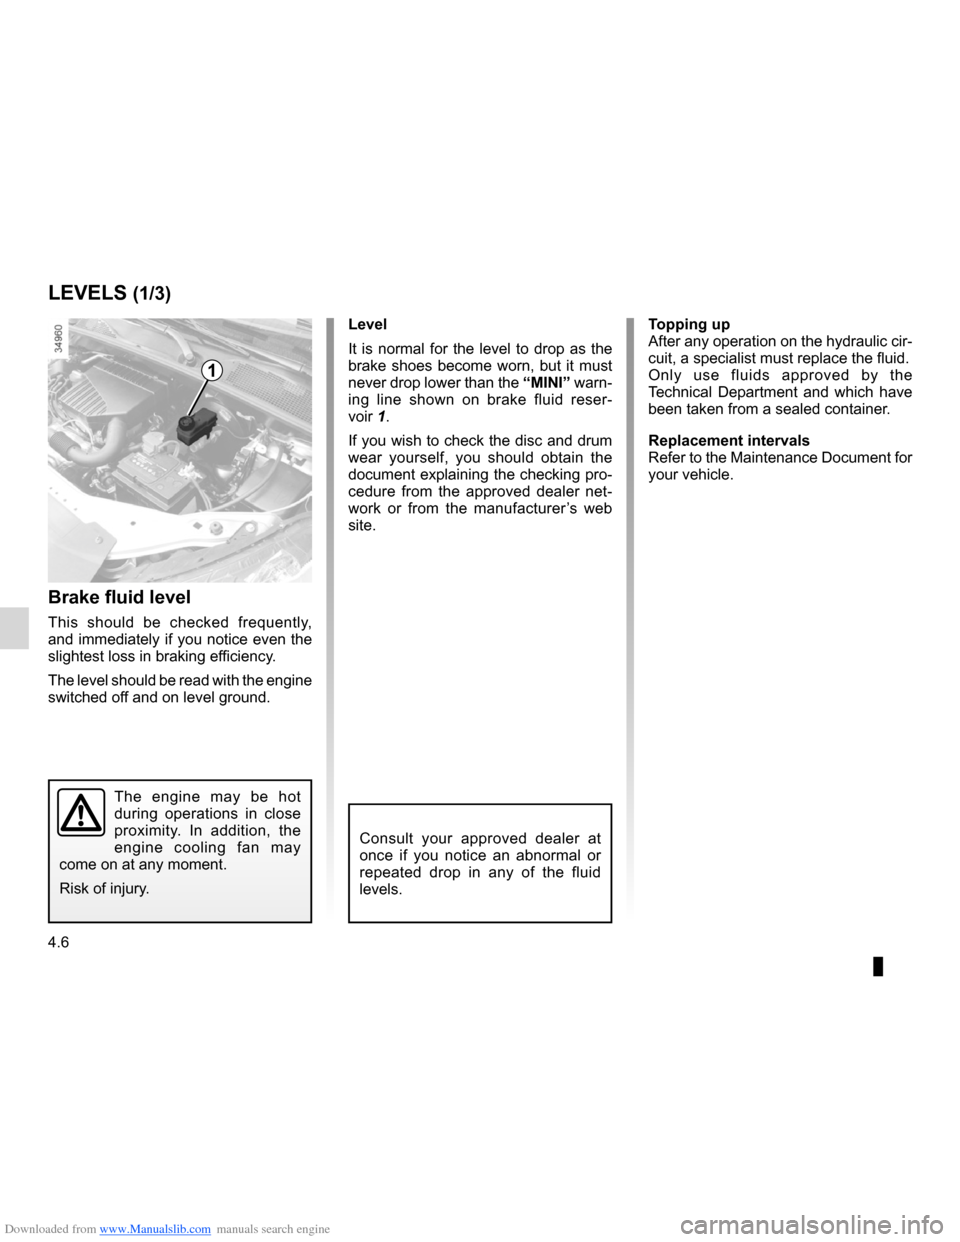 DACIA LODGY 2012 1.G Owners Manual Downloaded from www.Manualslib.com manuals search engine maintenance:mechanical  ...................................... (up to the end of the DU)
brake fluid  .........................................